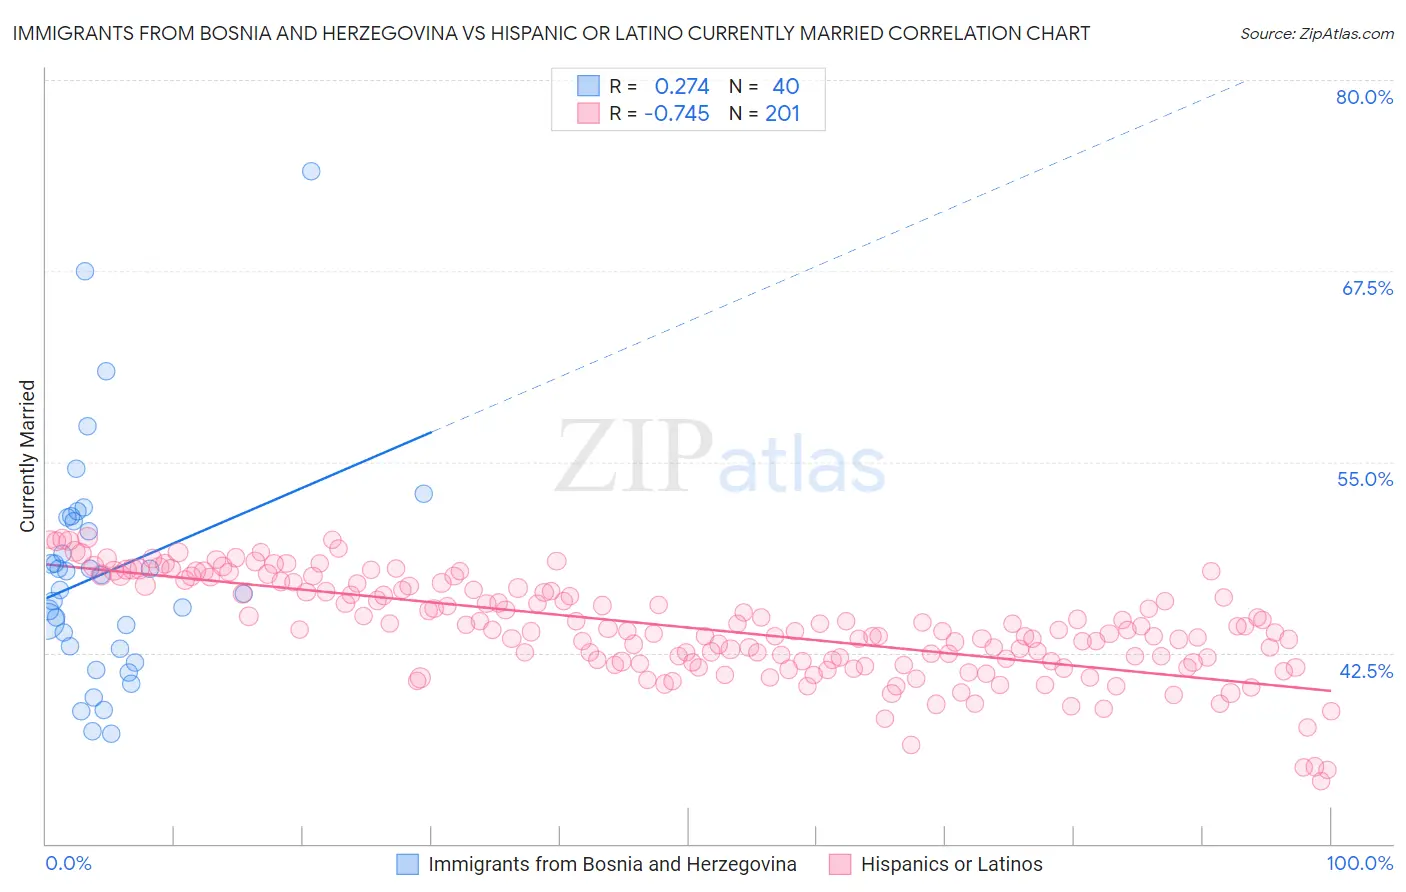 Immigrants from Bosnia and Herzegovina vs Hispanic or Latino Currently Married